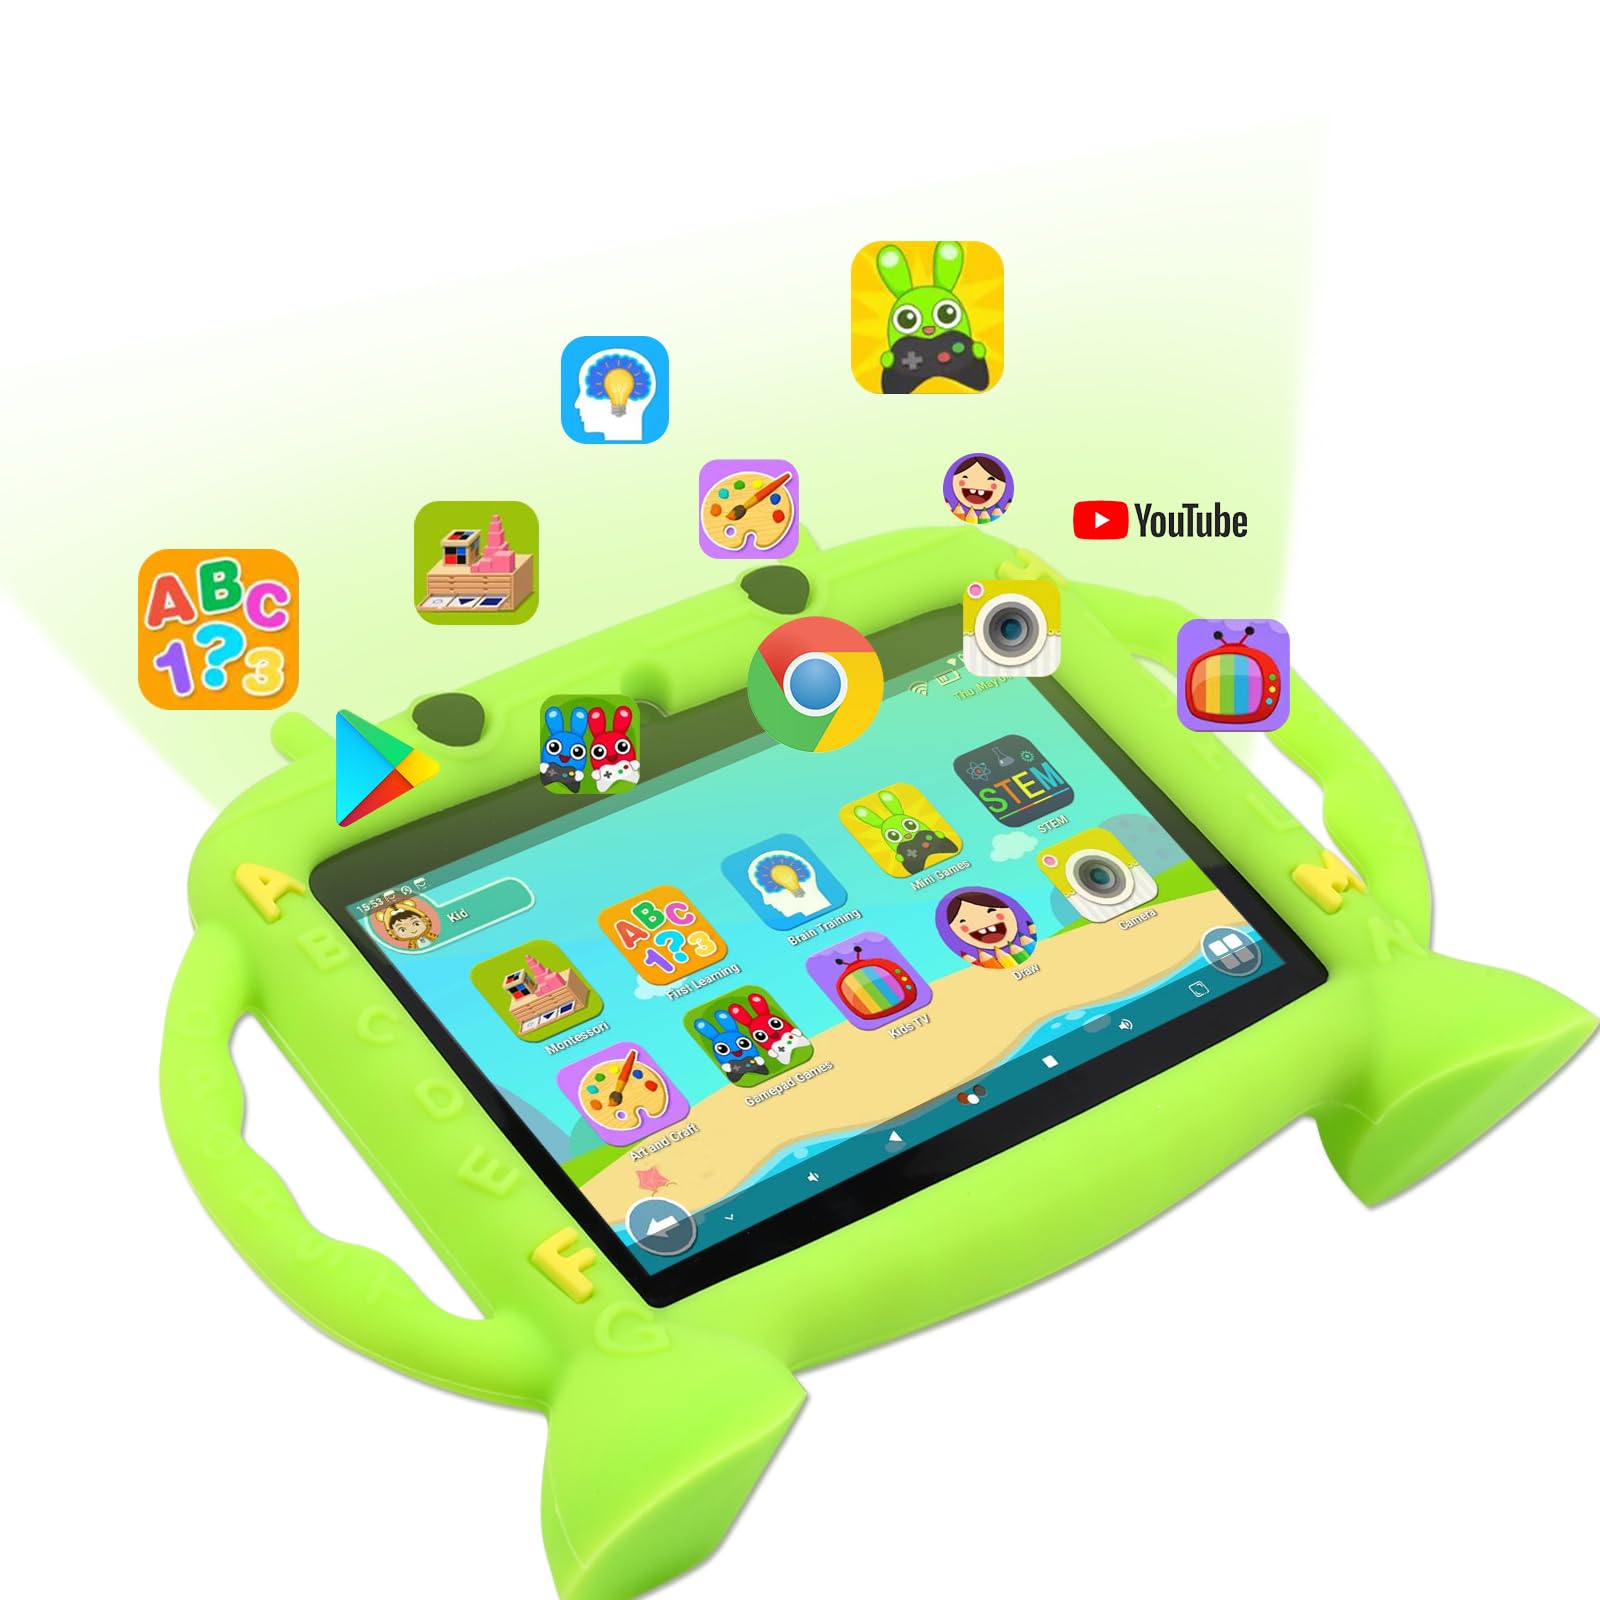 MengDash Kids Tablet, 7 inch Tablet for Kids 2-10, Educational Learning Toddler Tablet Android 11, 3GB RAM+32GB ROM Storage, Google Play YouTube, Baby Girl boy Gift